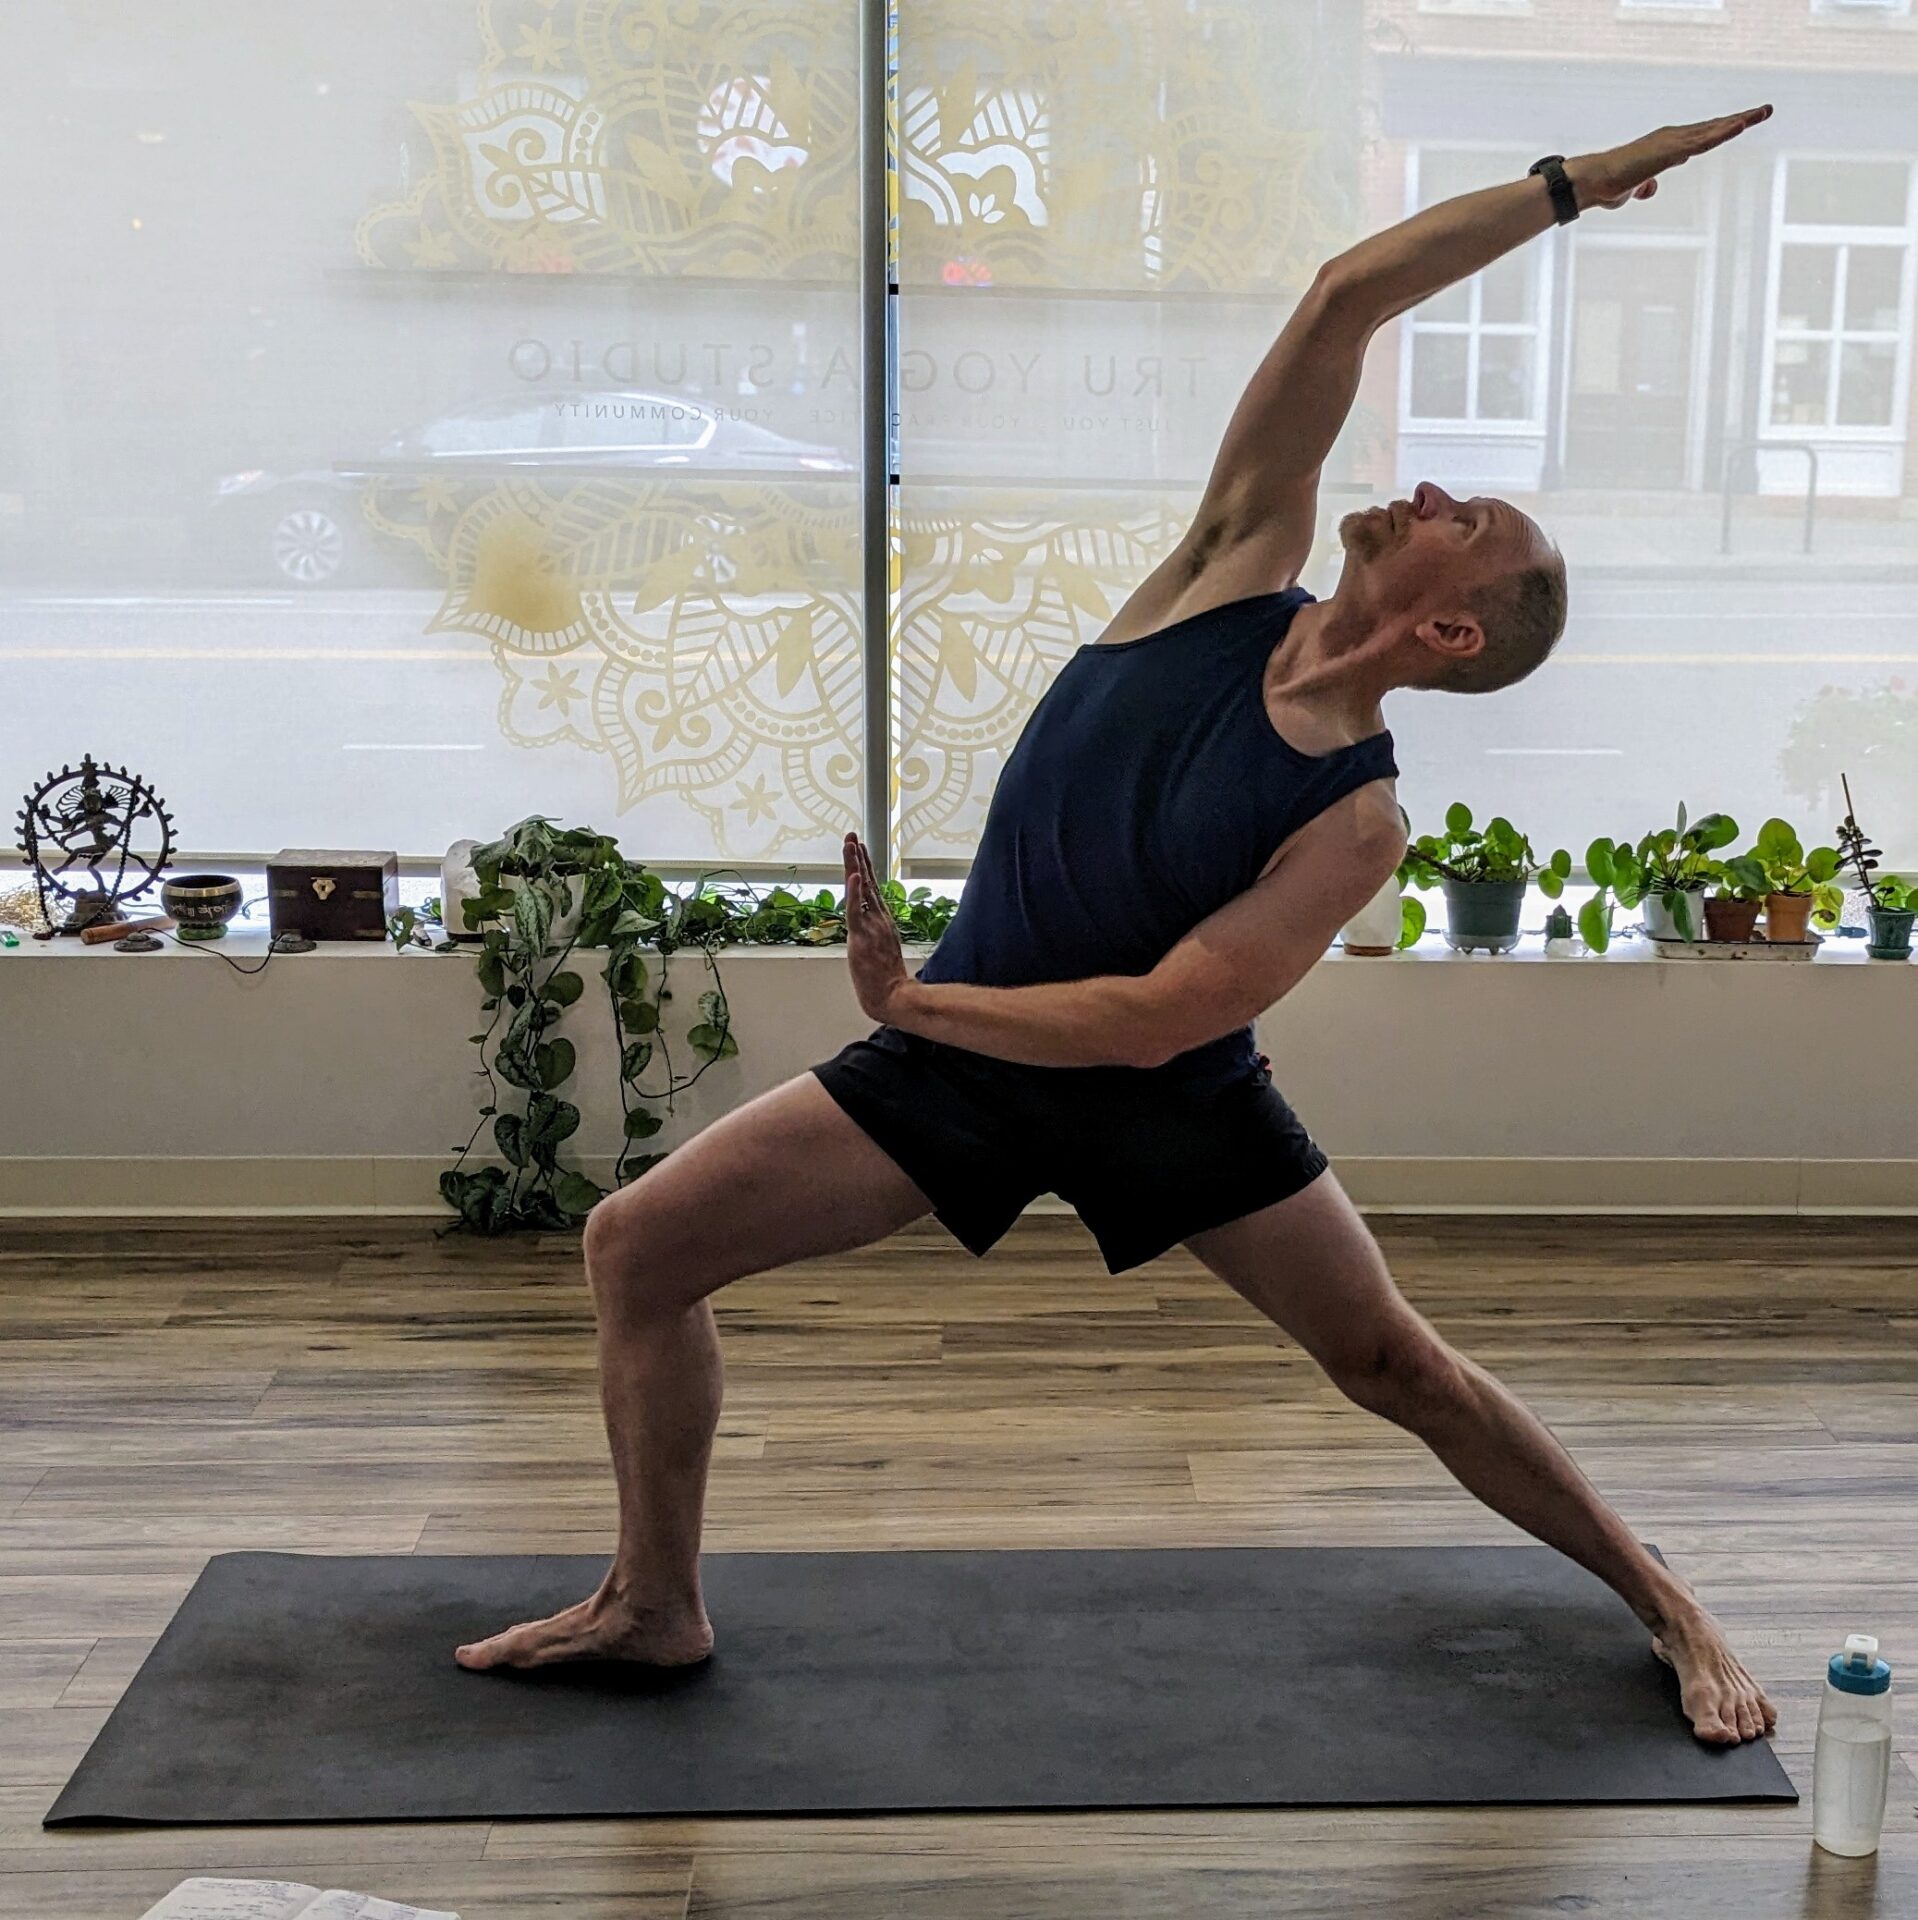 A photo of a man on a yoga mat wearing black tanktop and shorts in peaceful warrior yoga pose